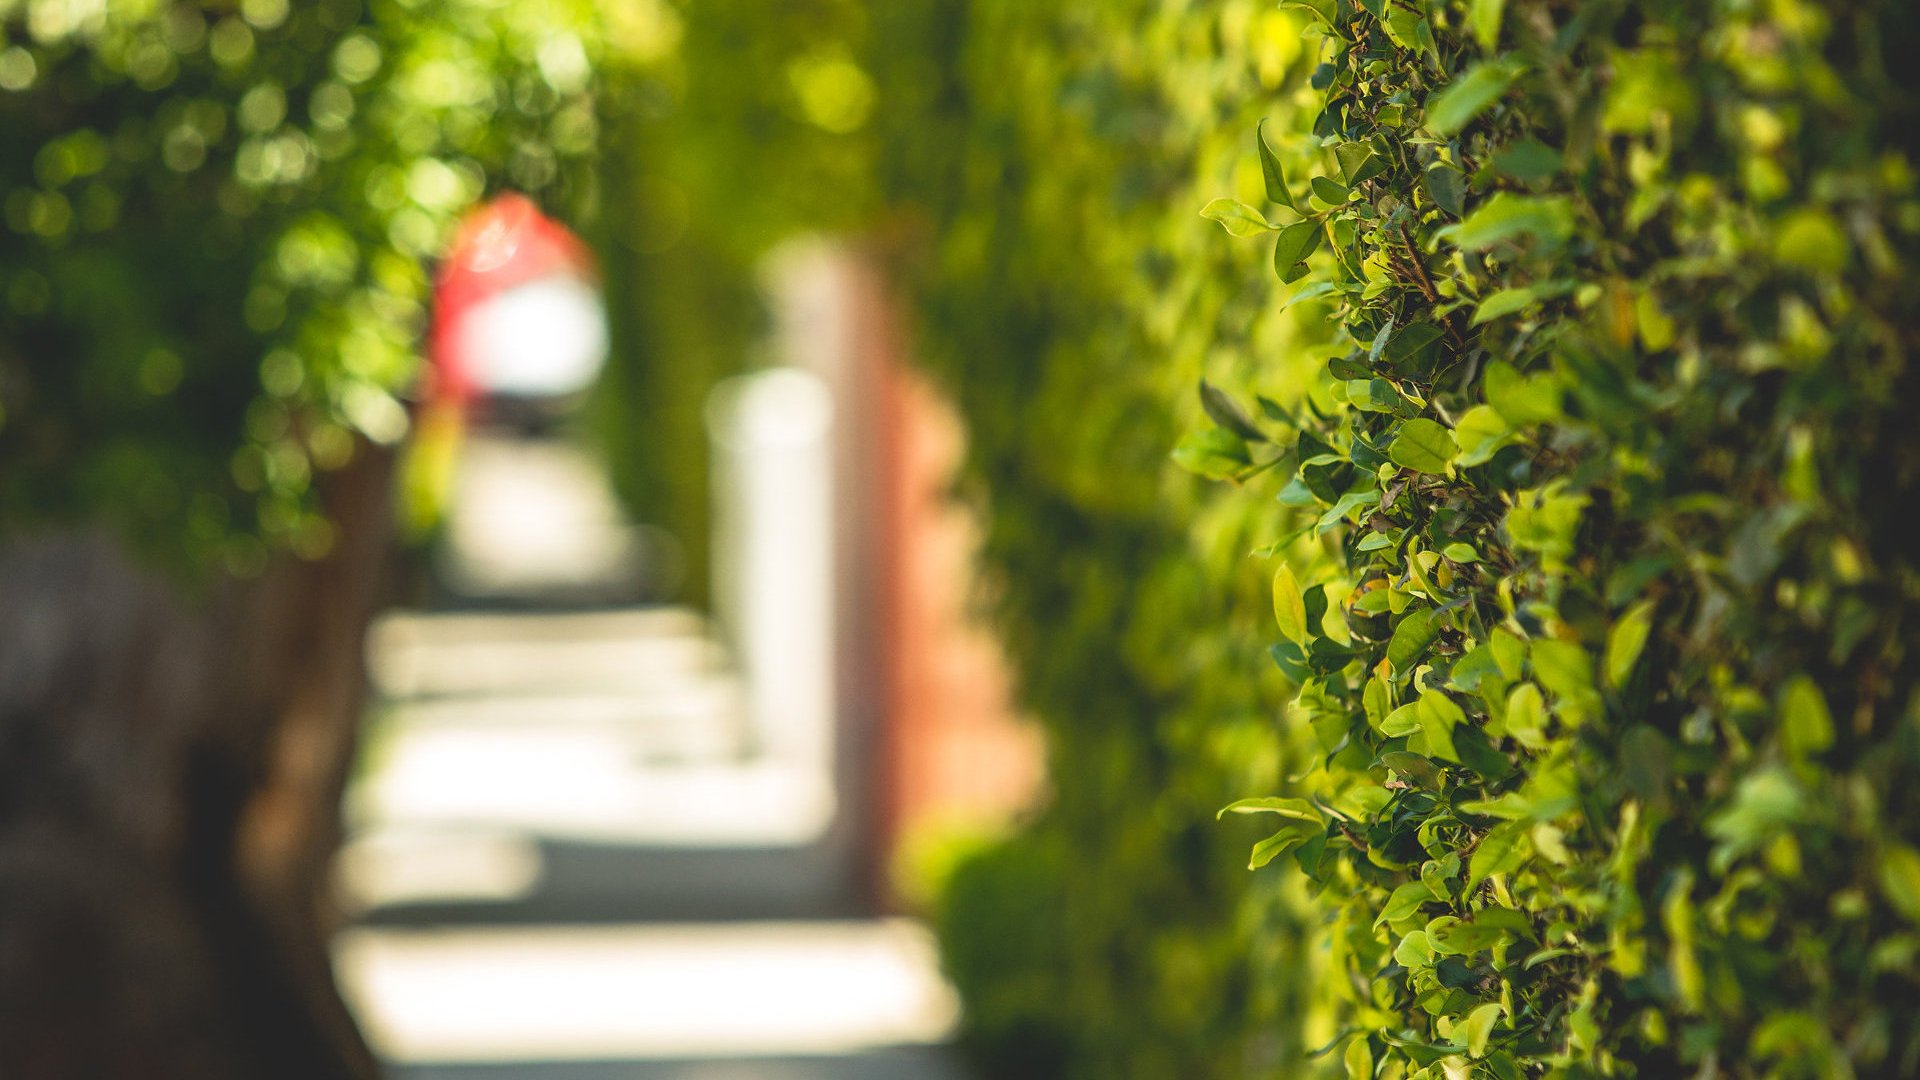 A verdant hedge lining a sunlit outdoor pathway